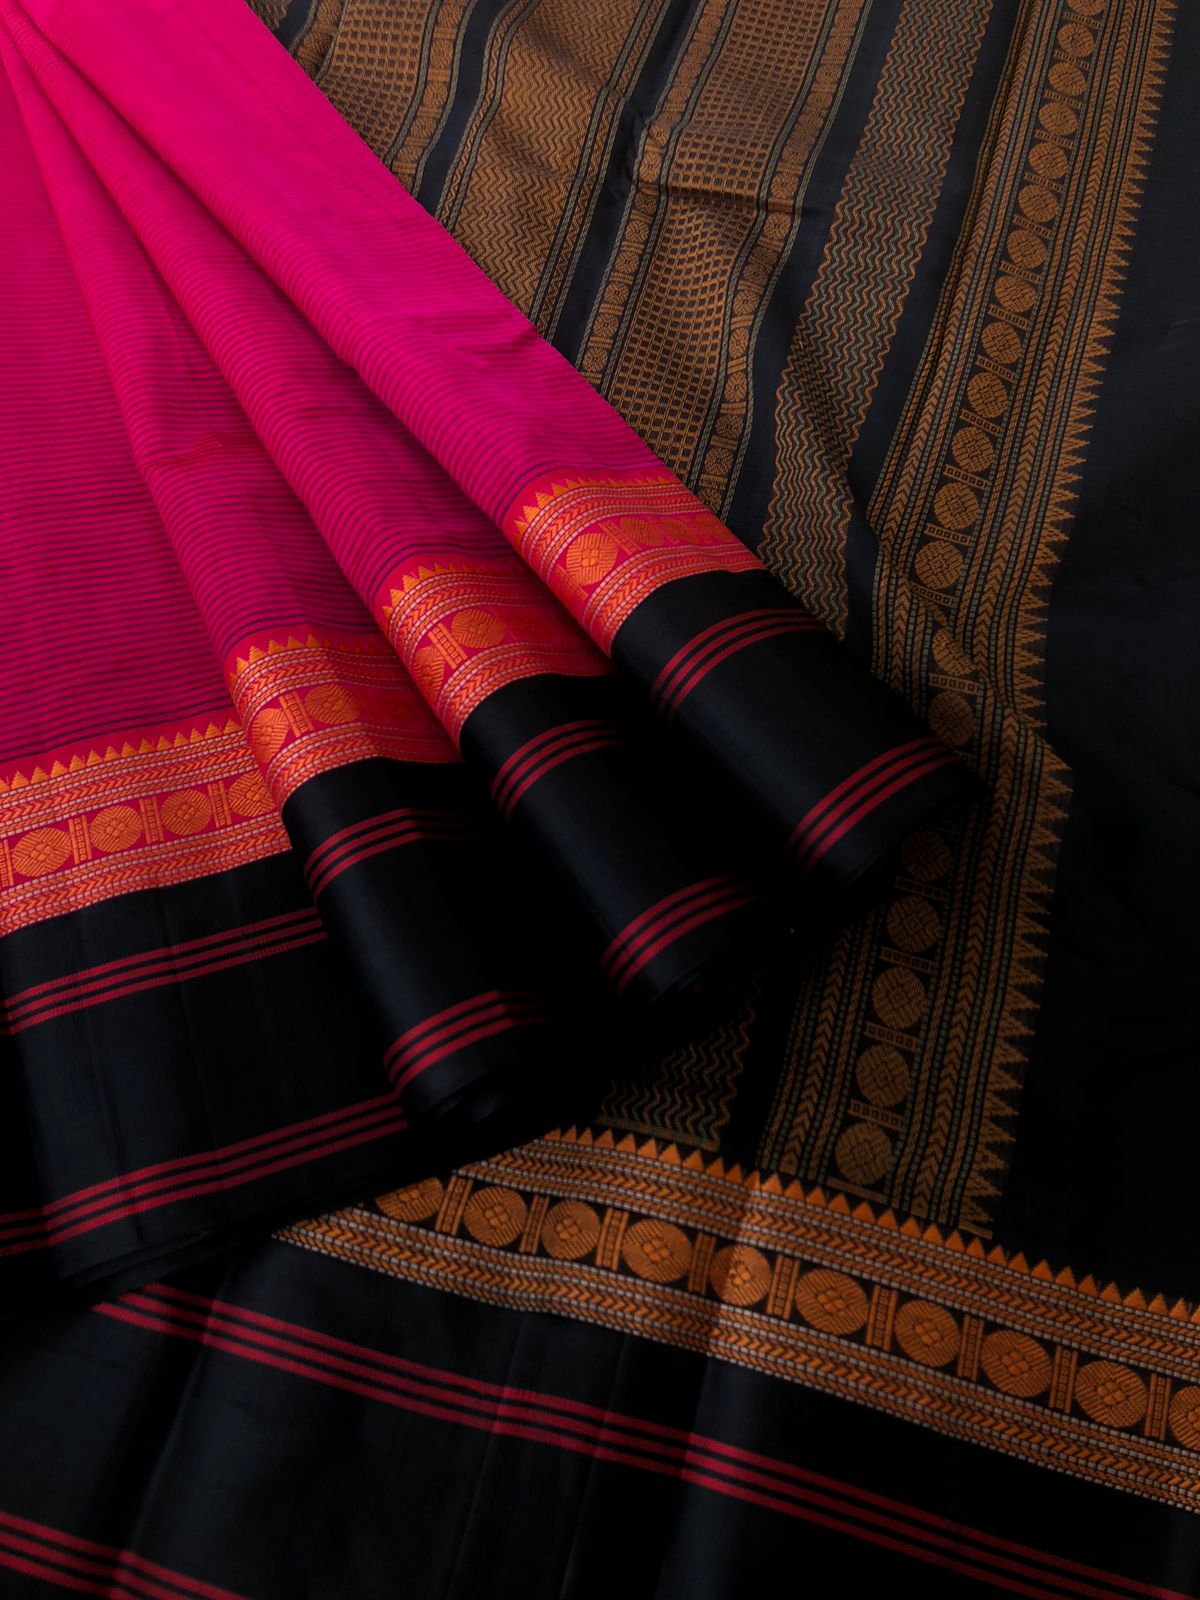 Korvai Silk Cotton with Pure Silk Woven Borders - gorgeous pink and black with oosi stripes woven body